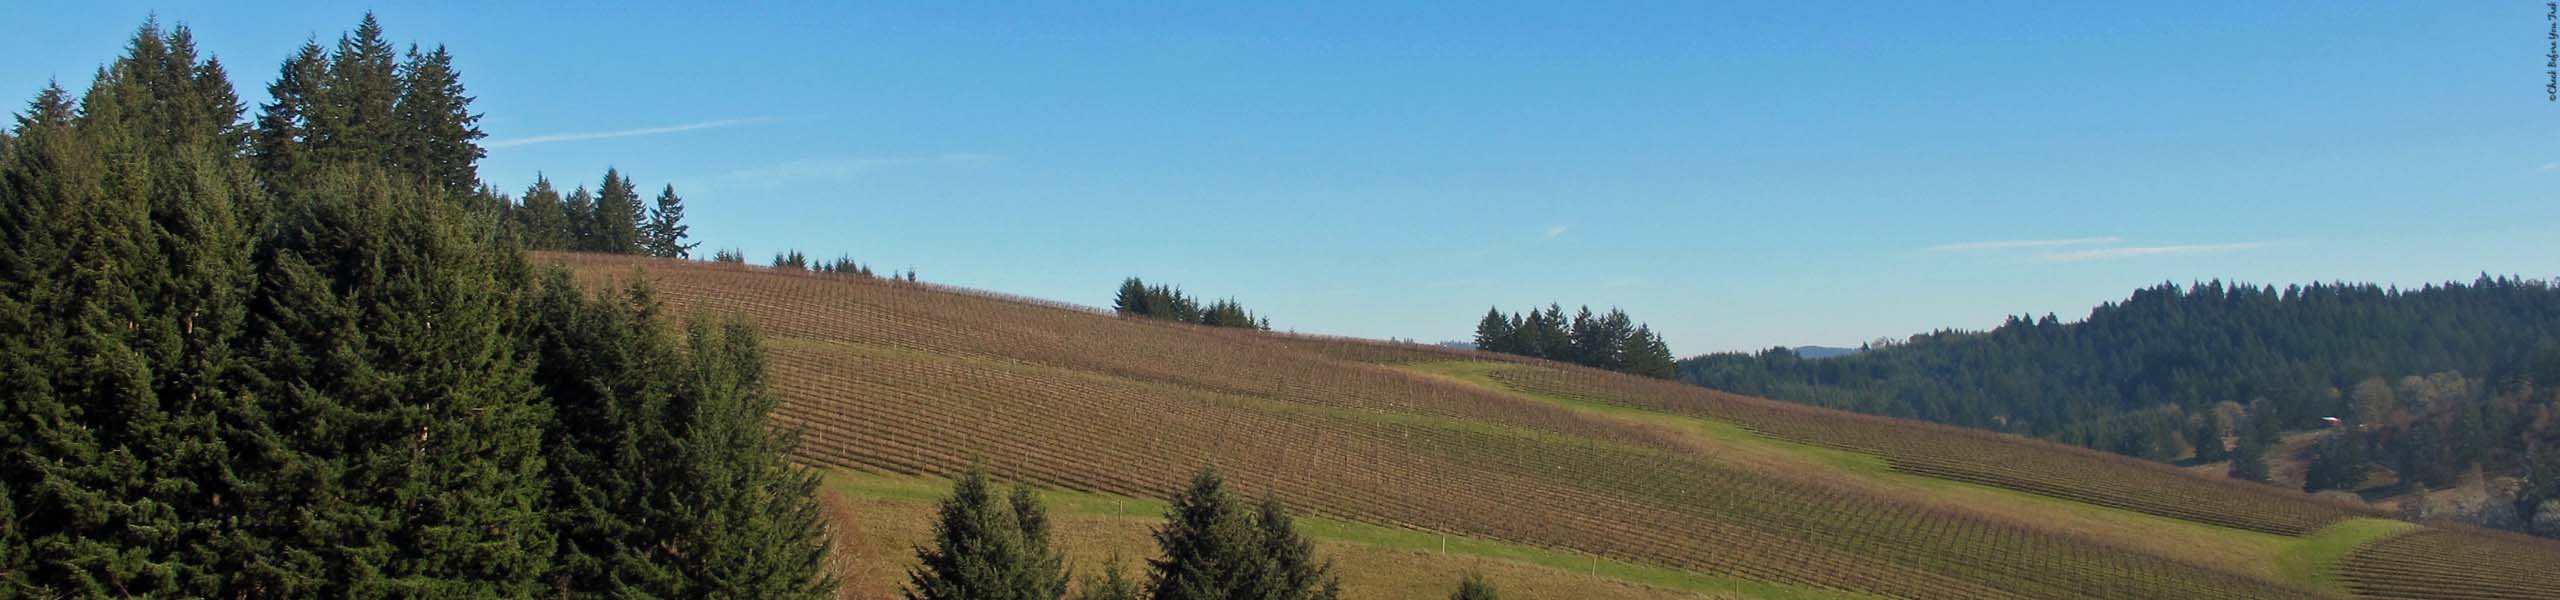 View from the tasting center at WillaKenzie Estate - Yamhill, Oregon